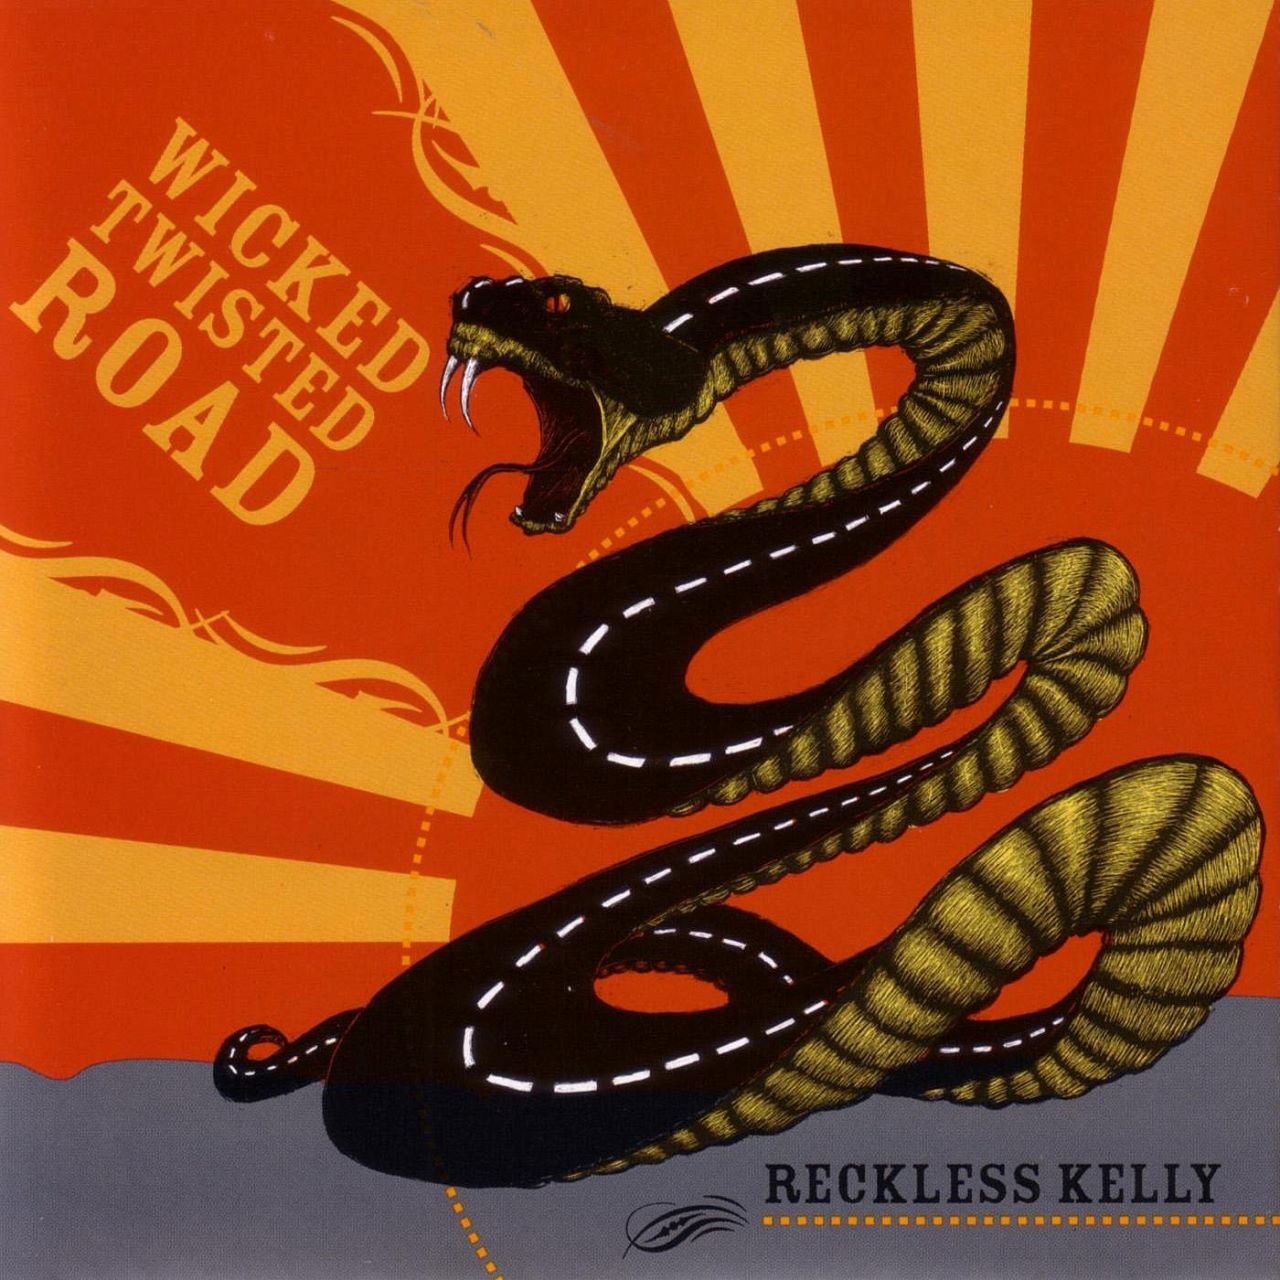 Reckless Kelly - Wicked Twisted Road cover album